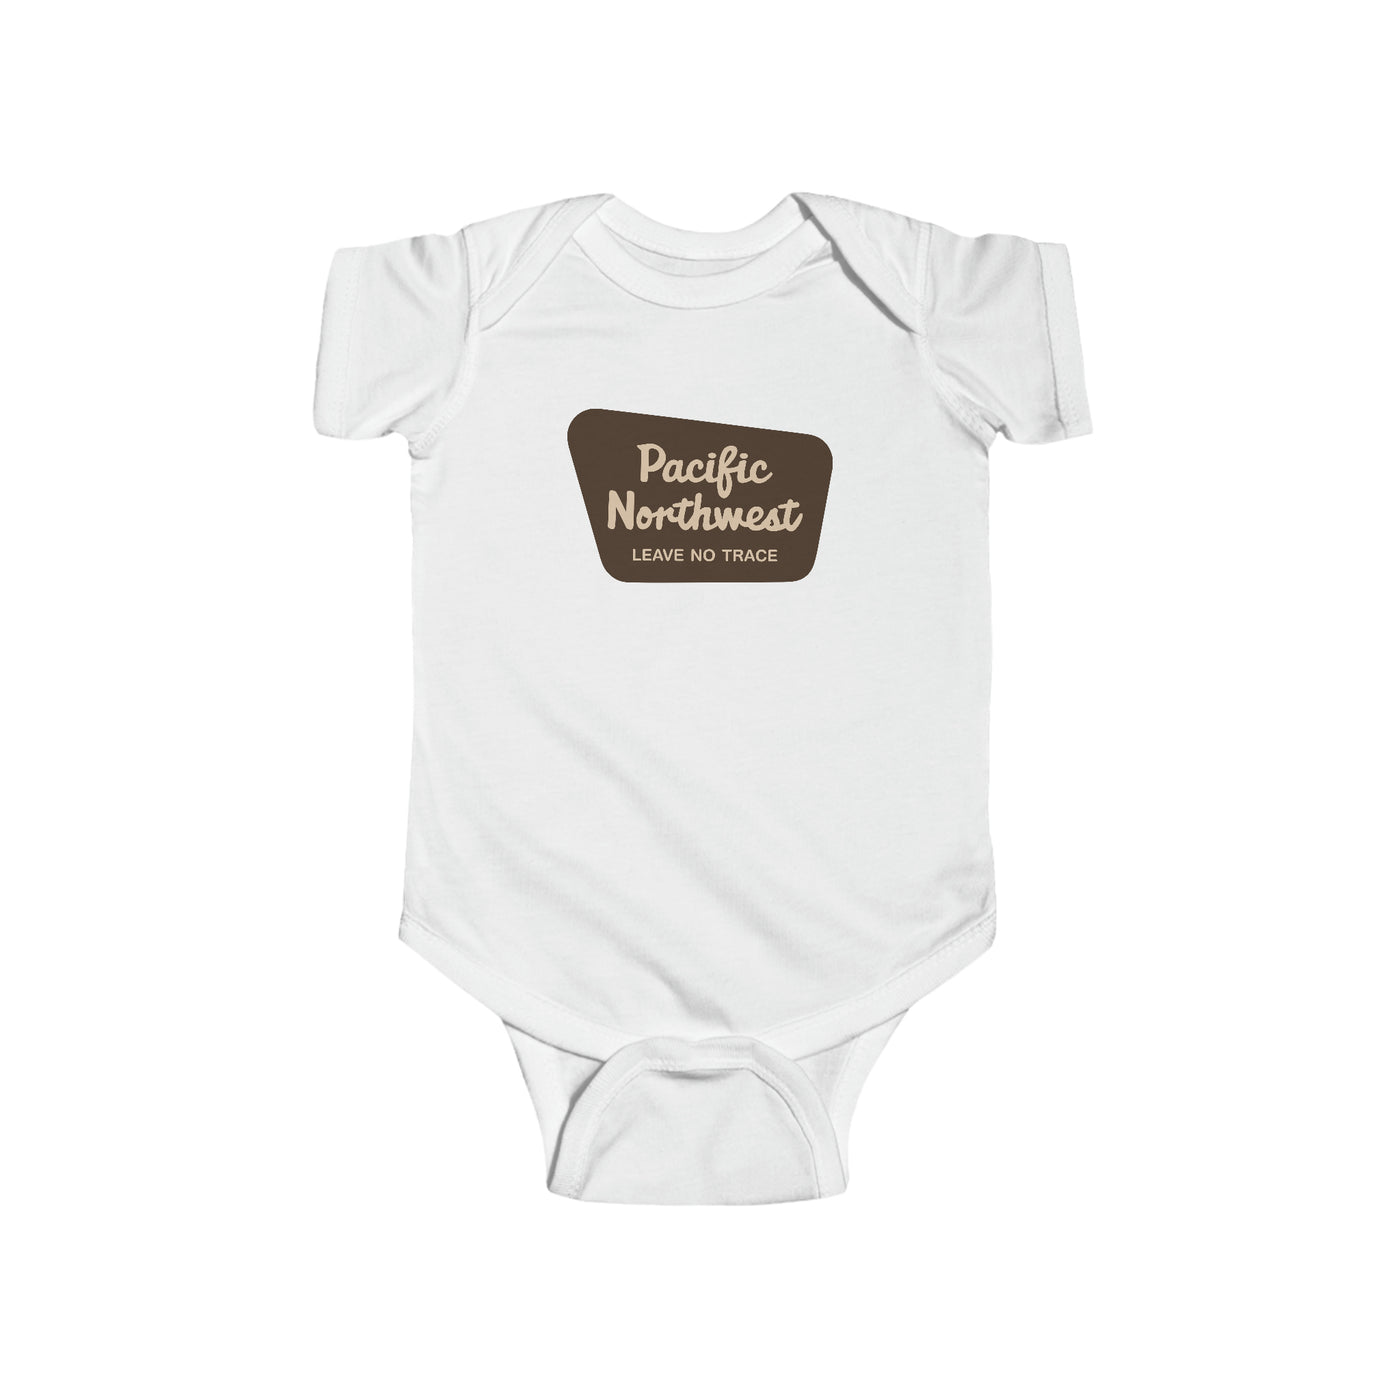 Pacific Northwest National Forest Baby Bodysuit